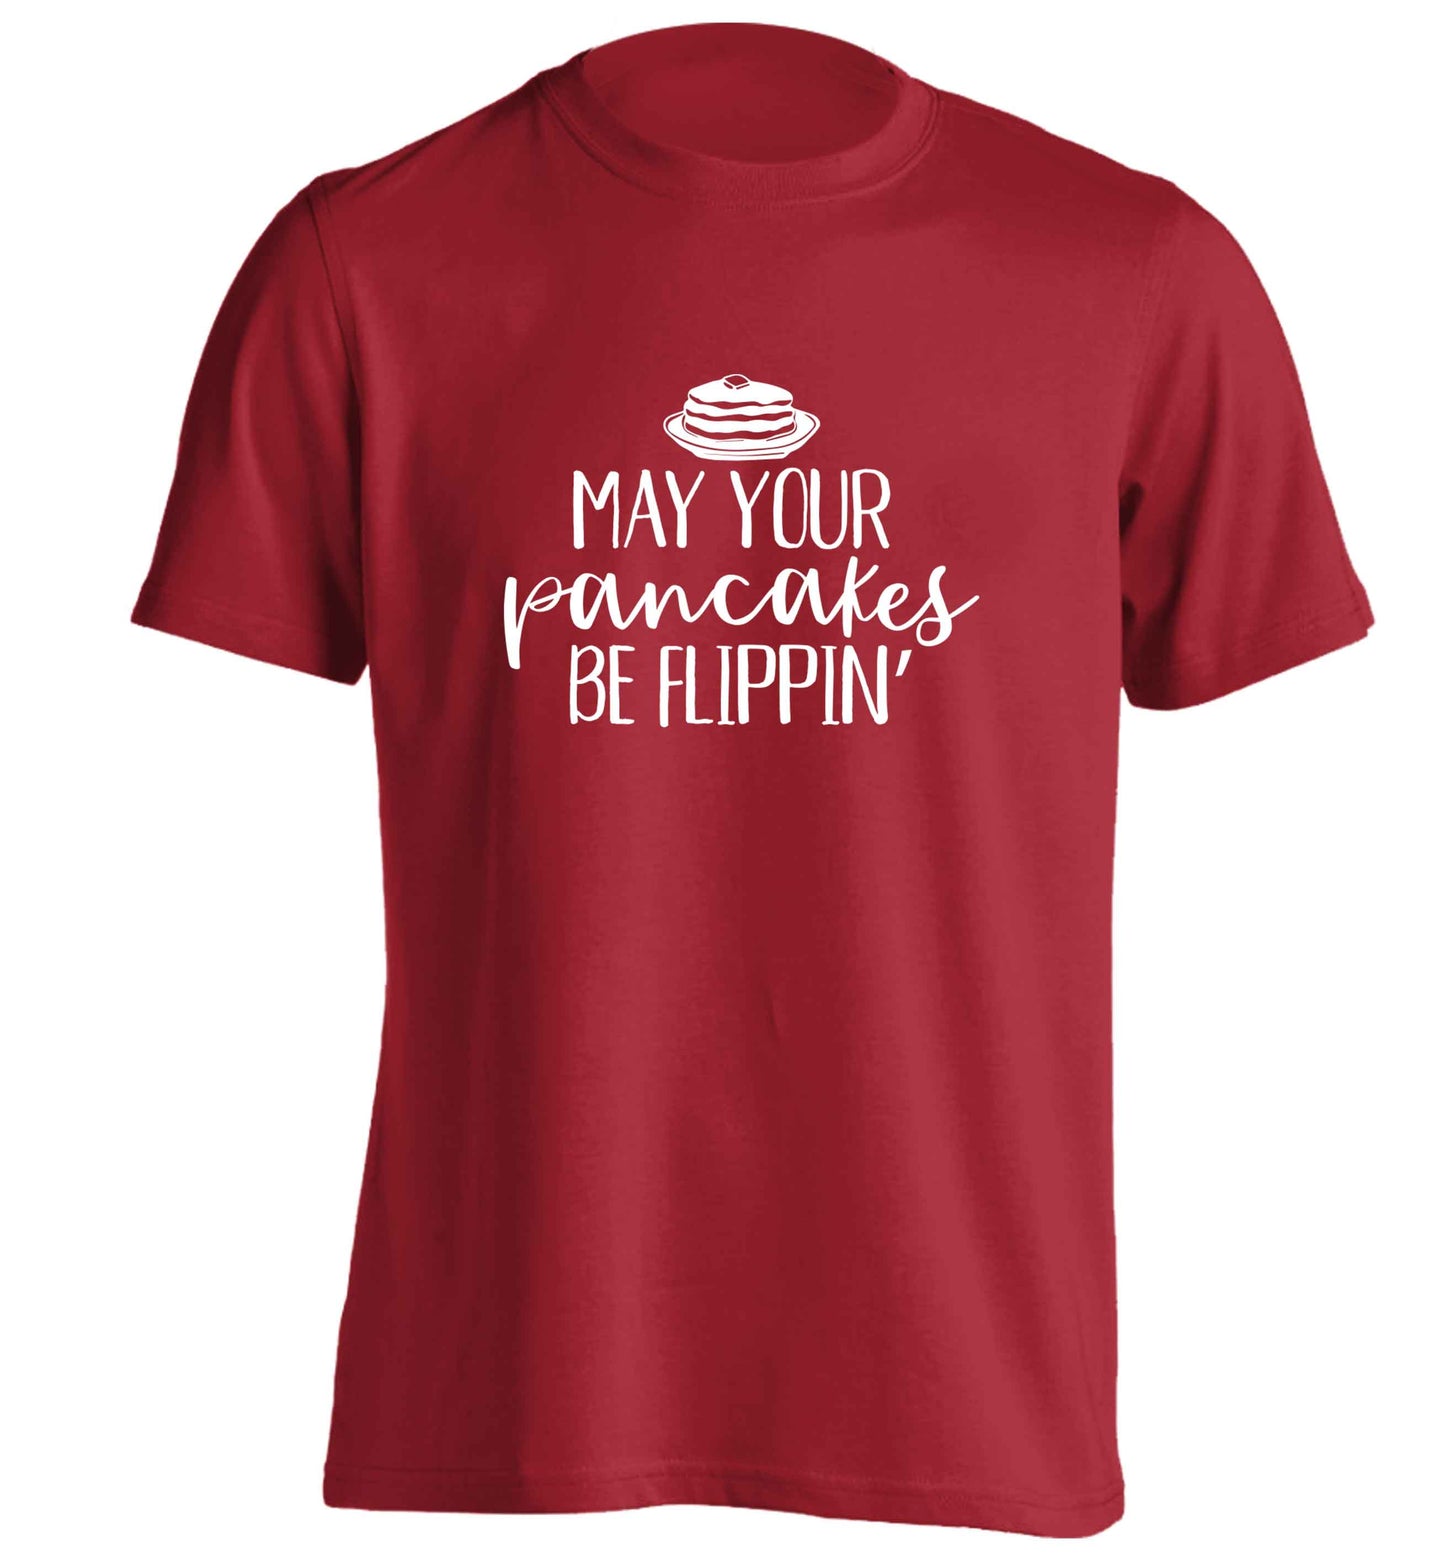 May your pancakes be flippin' adults unisex red Tshirt 2XL